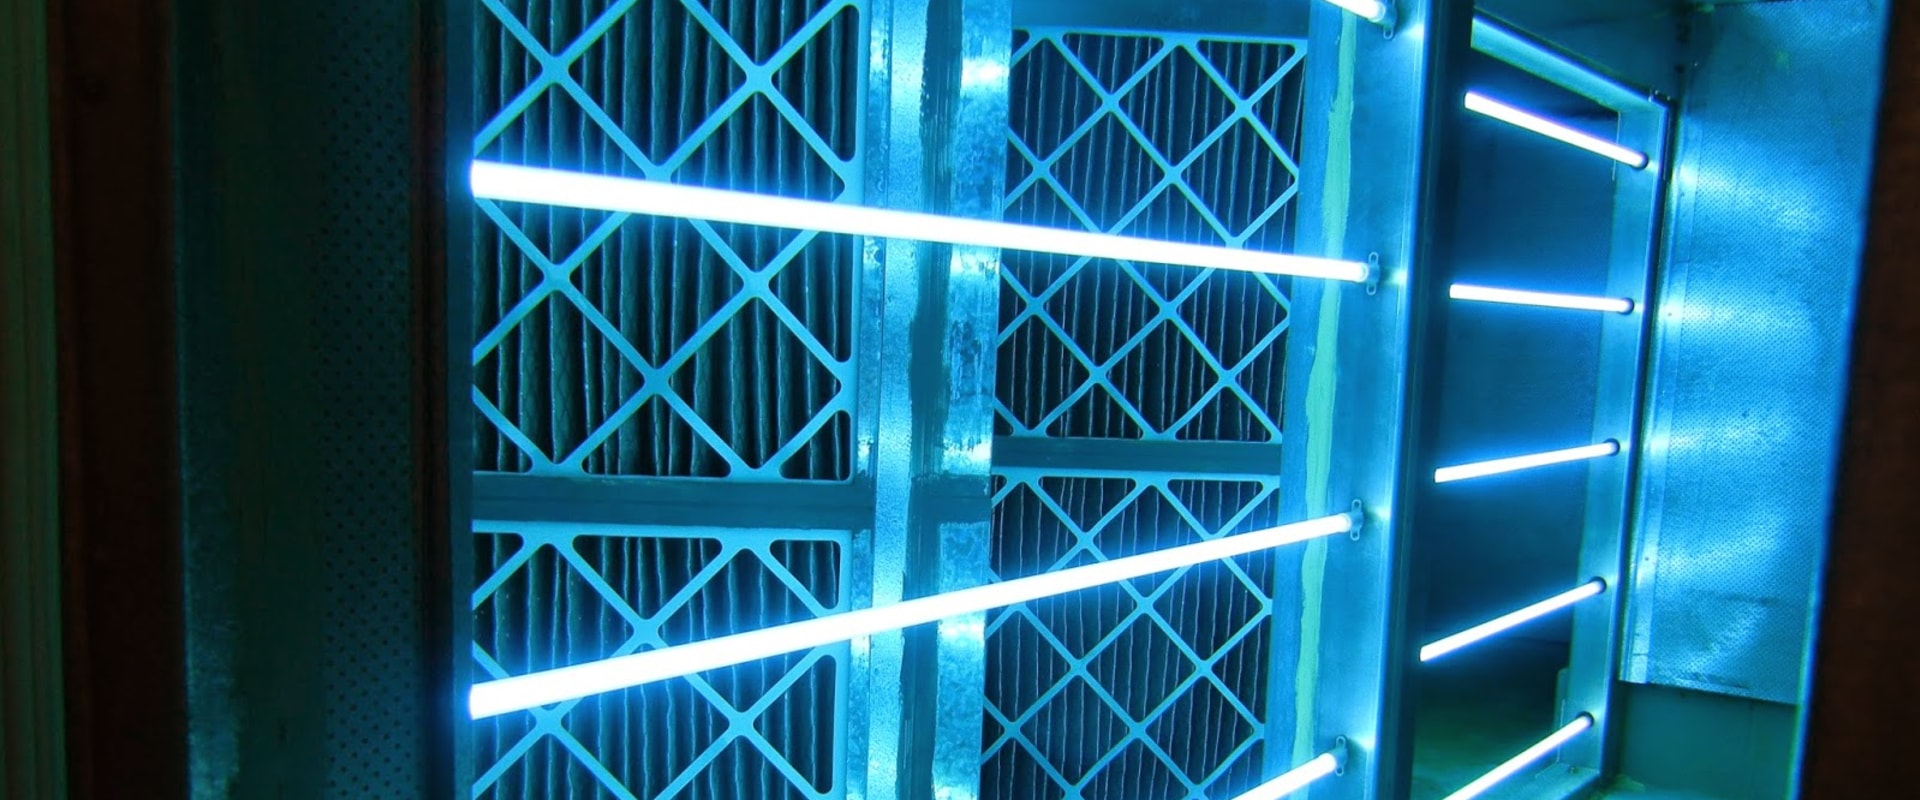 Maximizing Efficiency and Effectiveness When Installing UV Lights in an Existing HVAC System